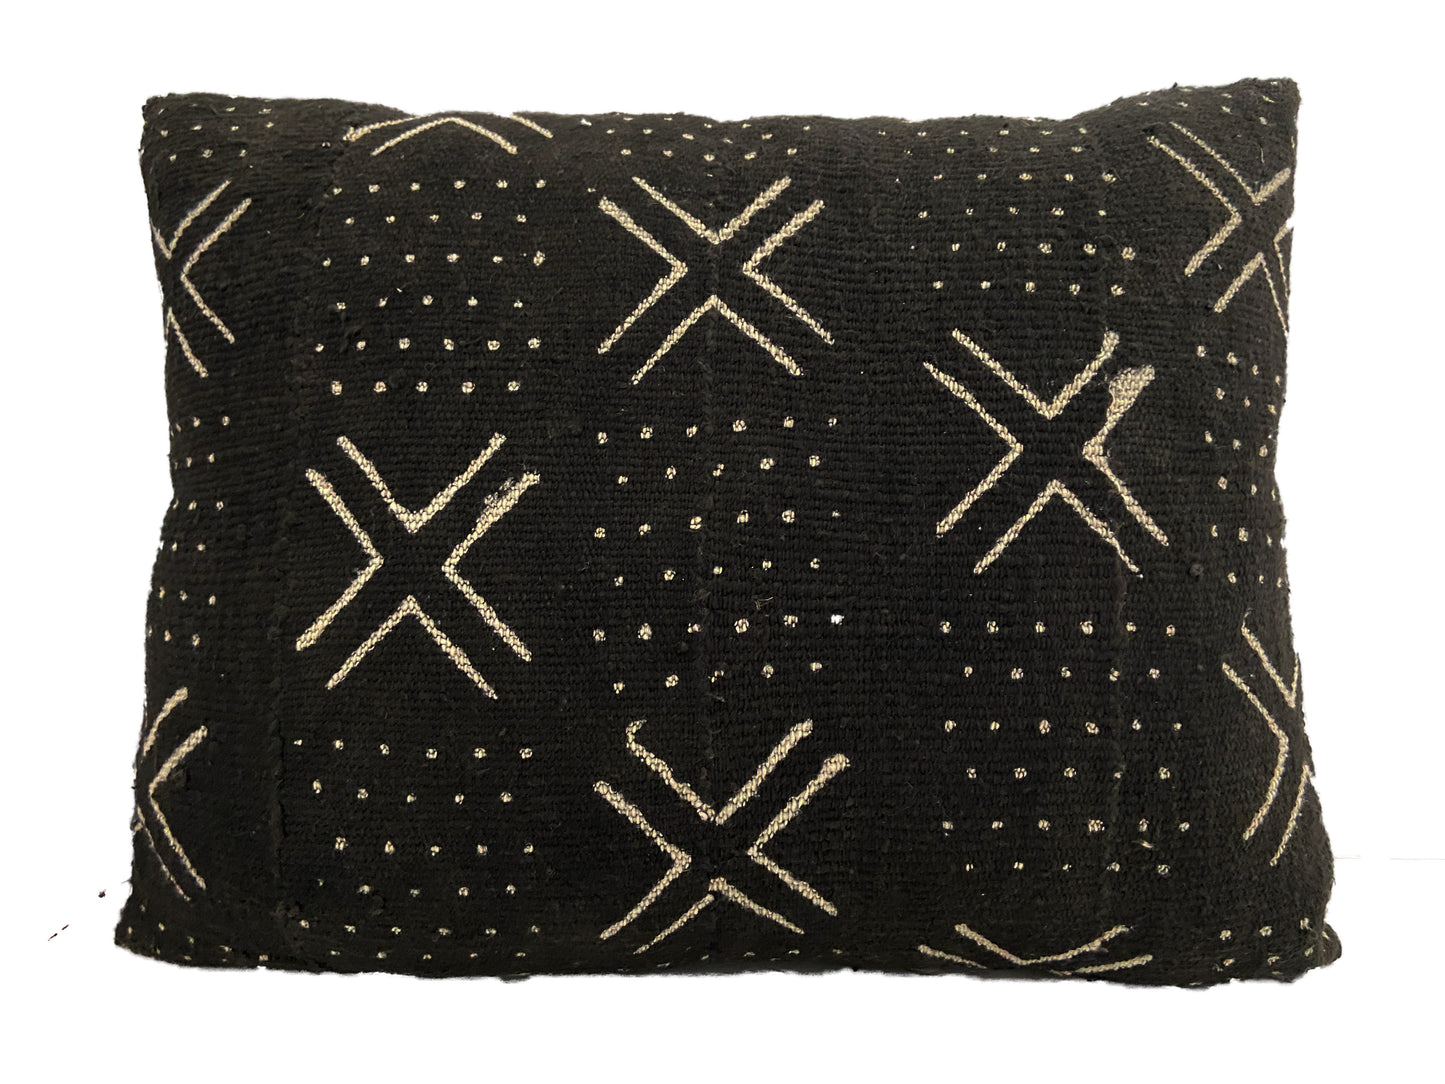 African Mud Cloth black & white pillows S/2 Mali 19" by 14" #2206